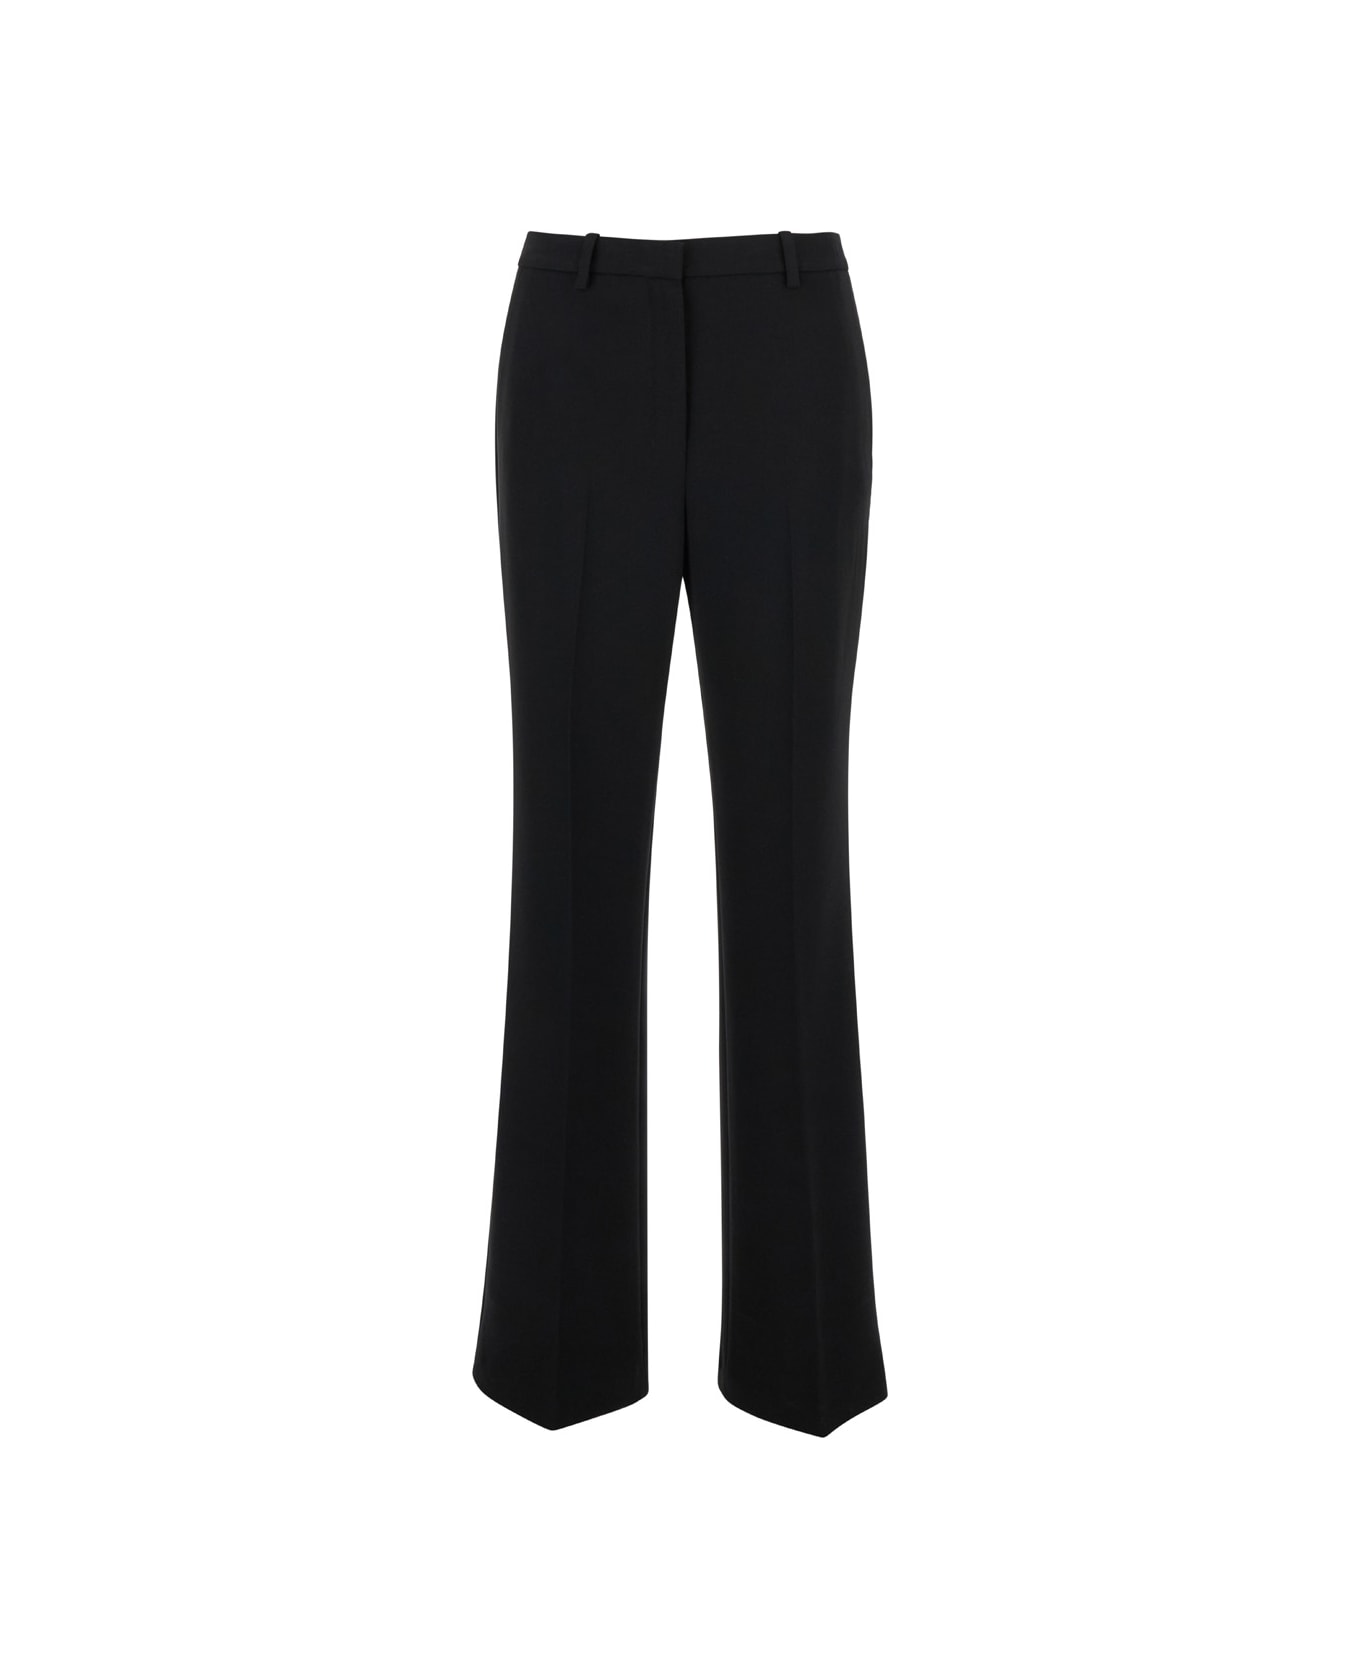 Theory Black Sartorial Pants With Stretch Pleat In Technical Fabric Woman - Black